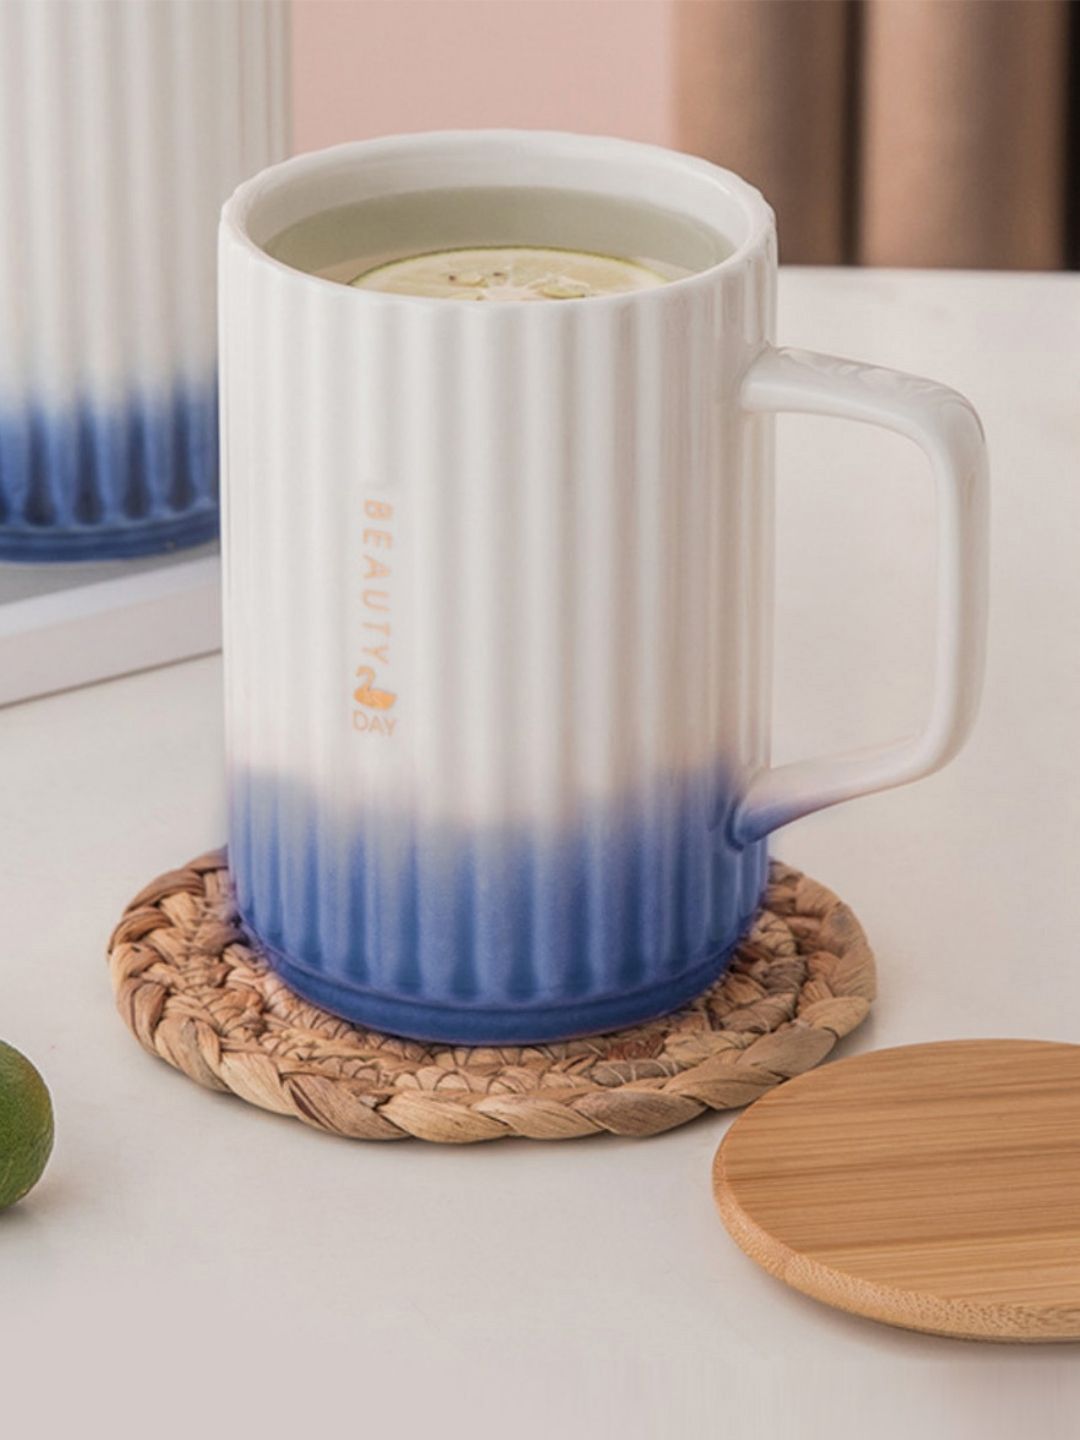 Nestasia White & Blue Ceramic Mug with Lid and Spoon Price in India